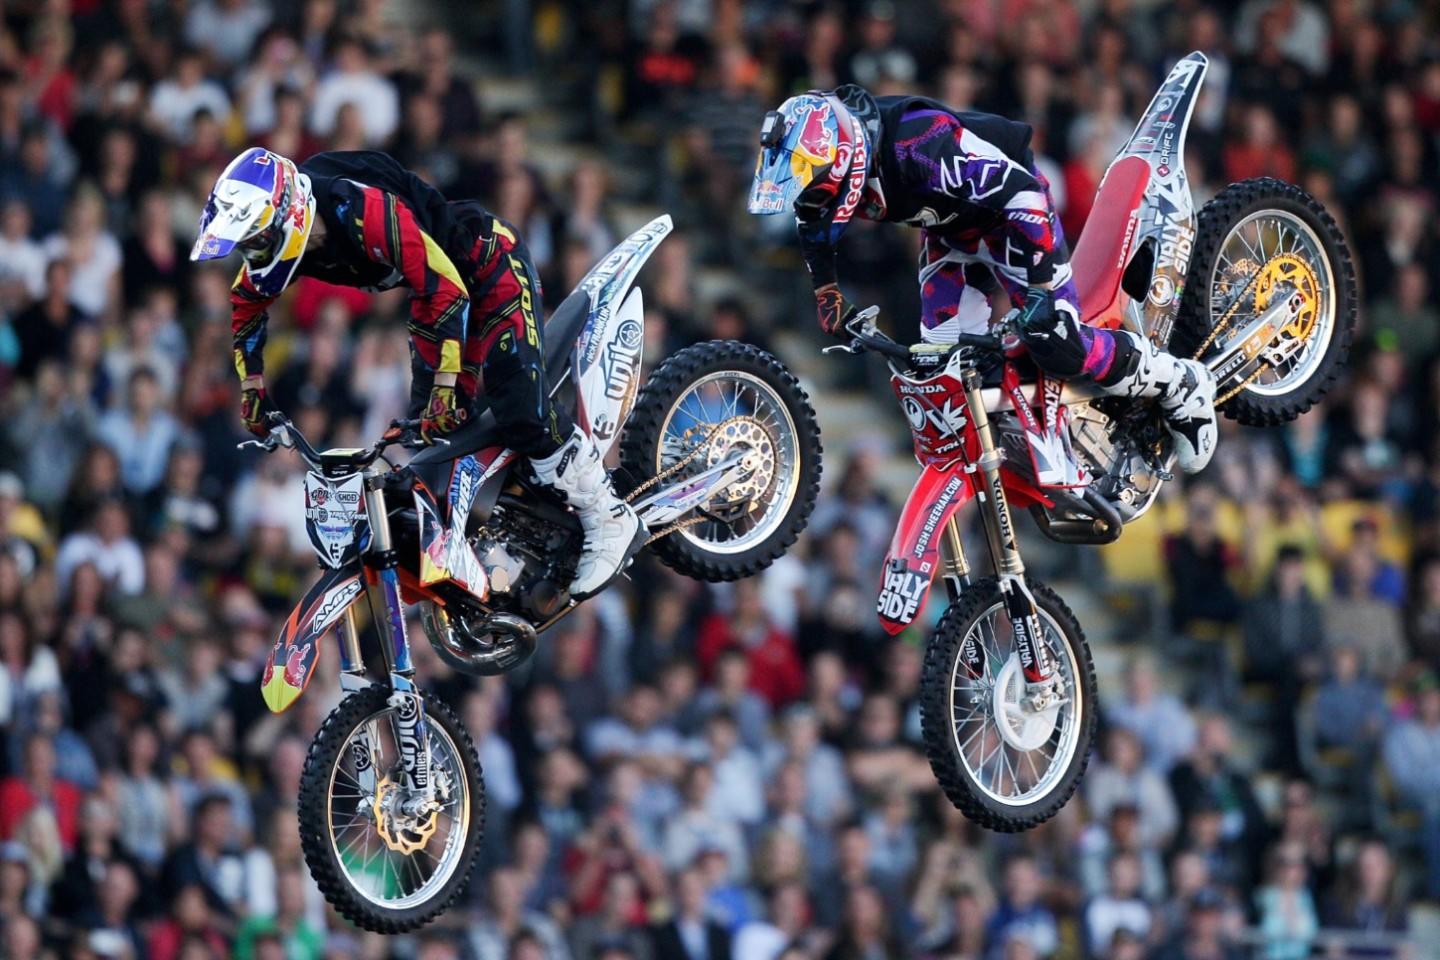 Nitro Circus Live Tickets Buy or Sell Nitro Circus Live 2022 Tickets